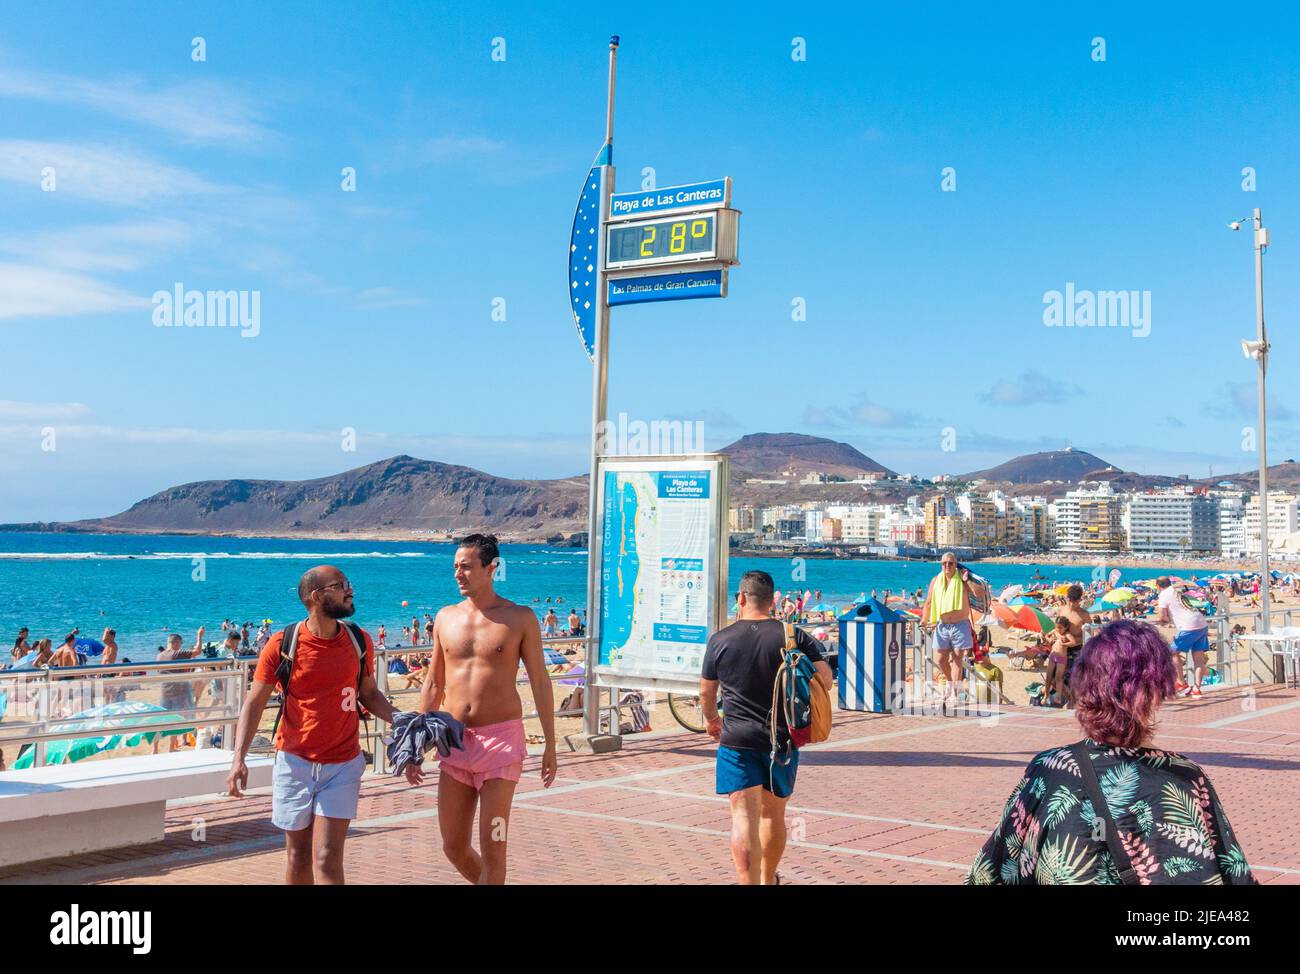 Las Palmas, Gran Canaria, Canary Islands, Spain. 26th June, 2022. Tourists, many from the UK, bask on the city beach in Las Palmas on Gran Canaria. Credit: Alan Dawson/ Alamy Live News. Stock Photo